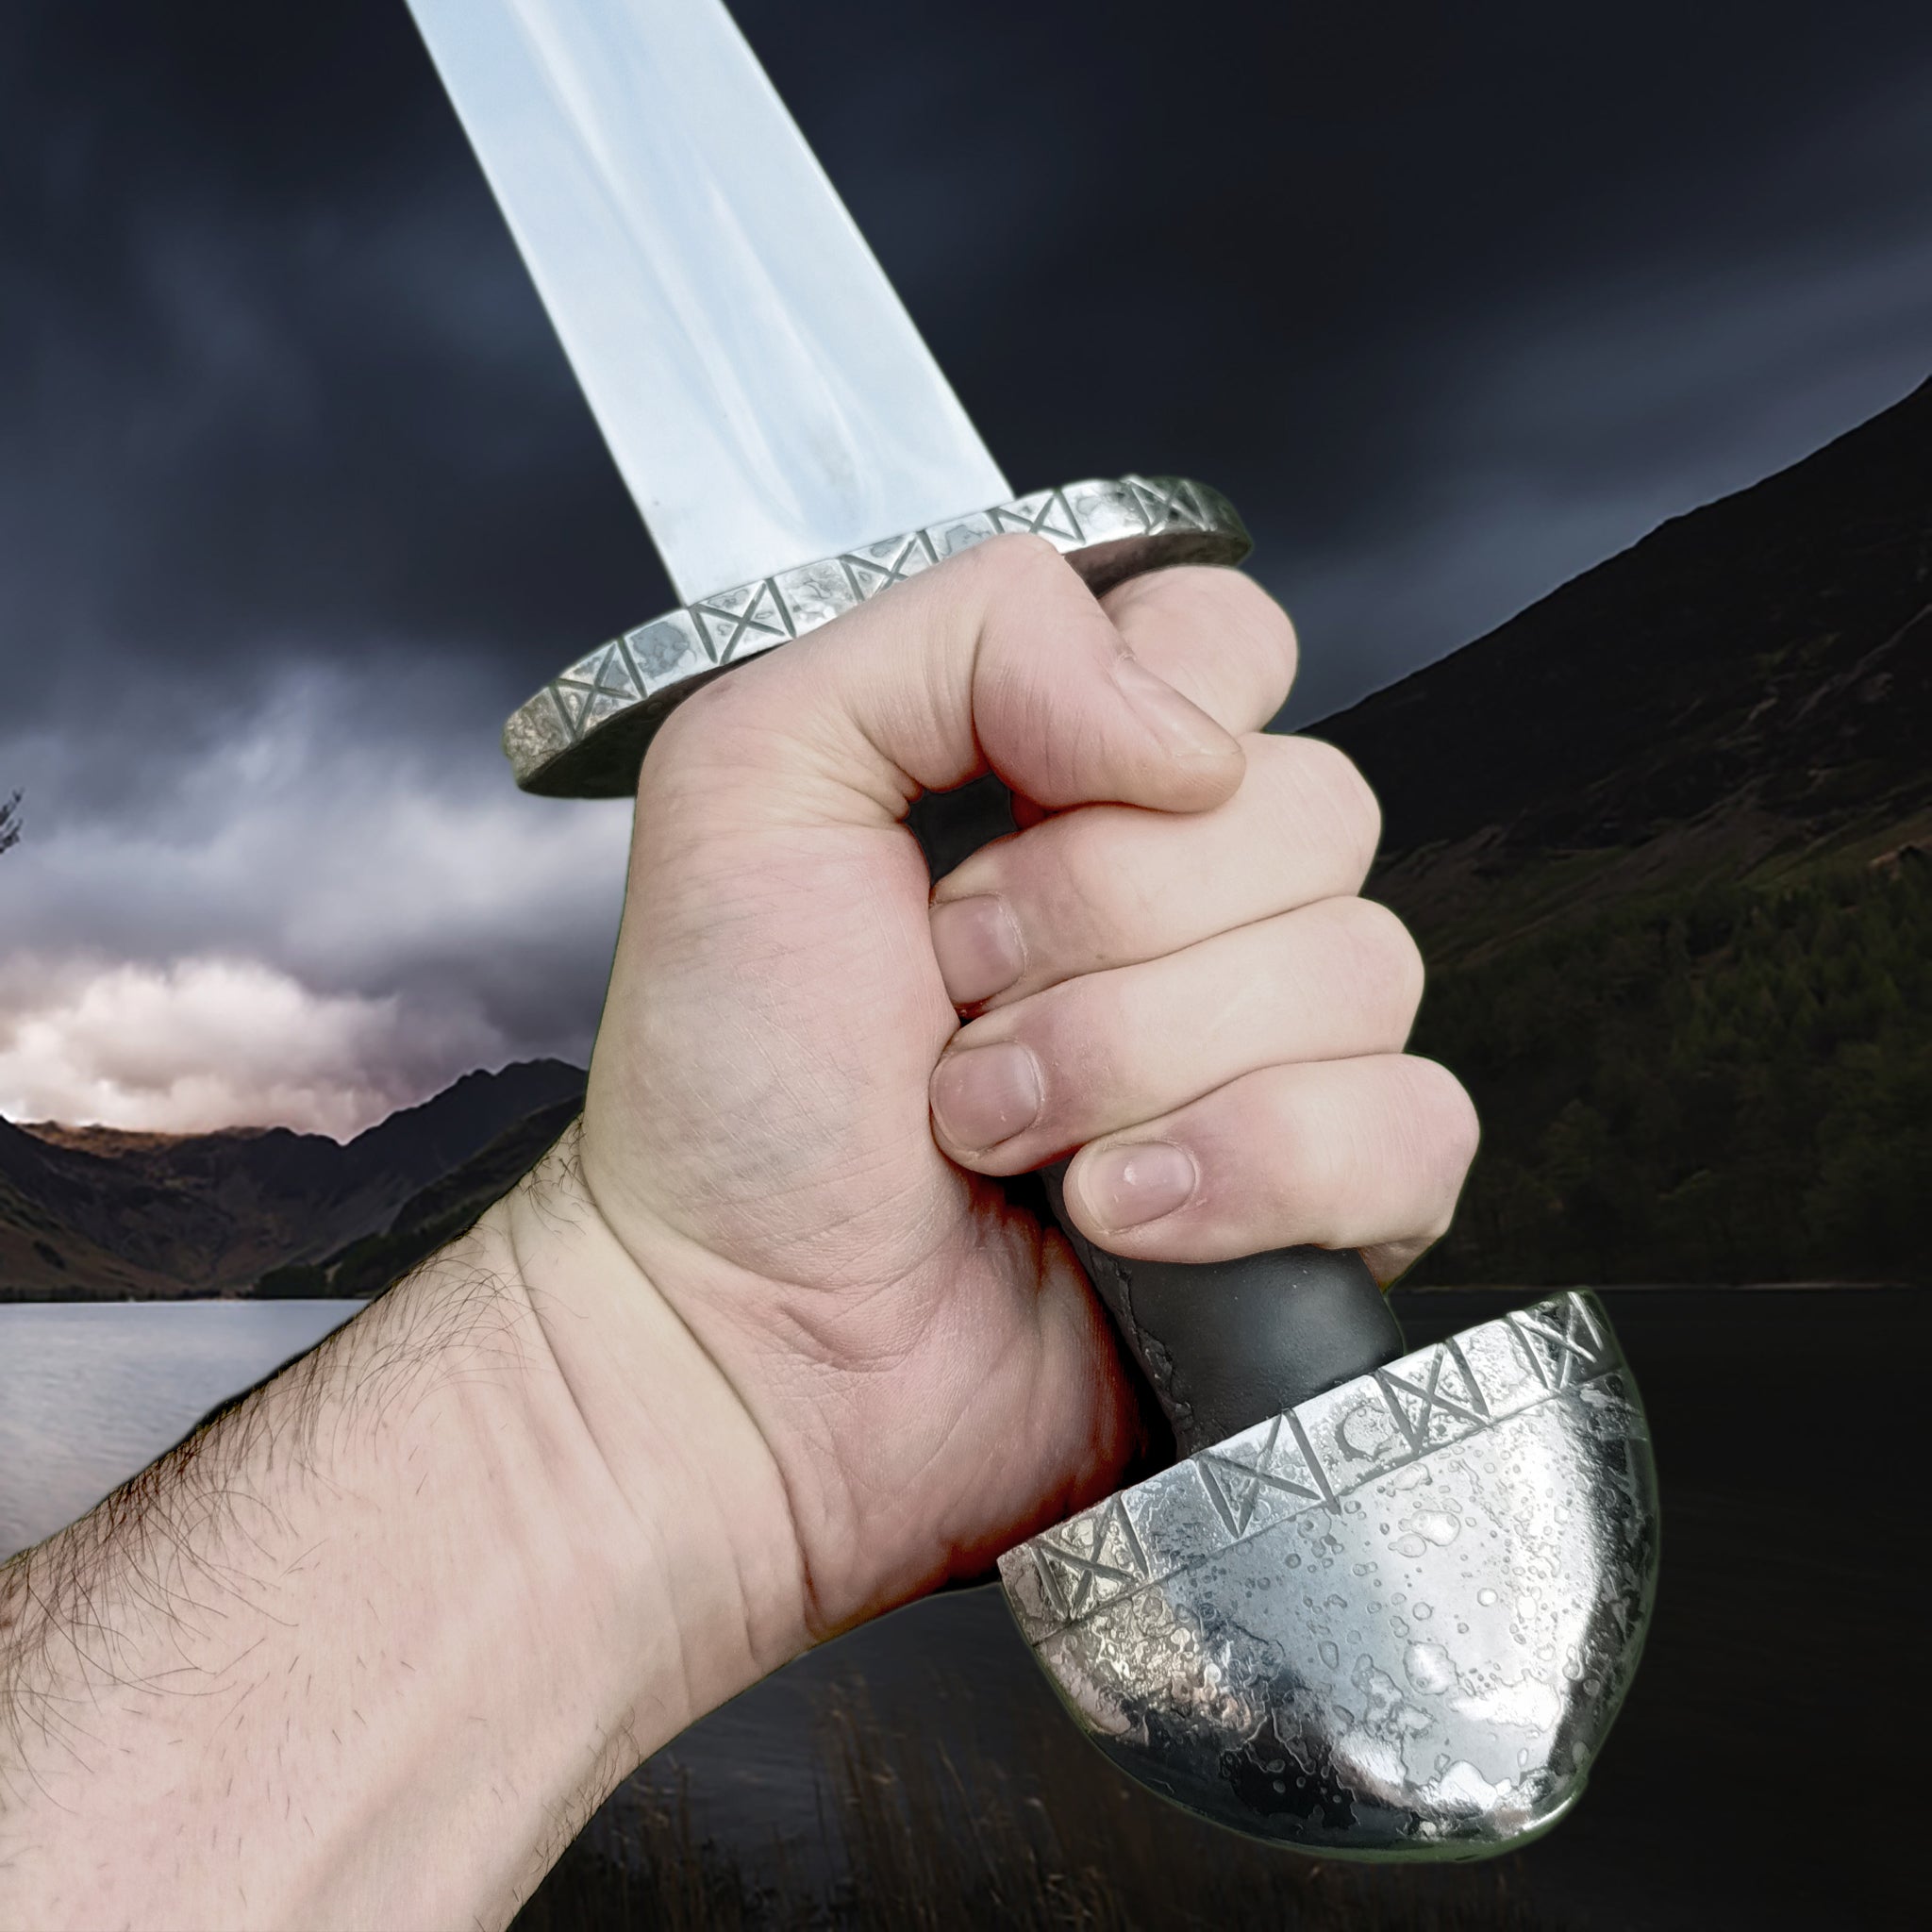 Blunt Reenactment Viking Long Sword with Decorated Hilt in Hand - Close up Grip View